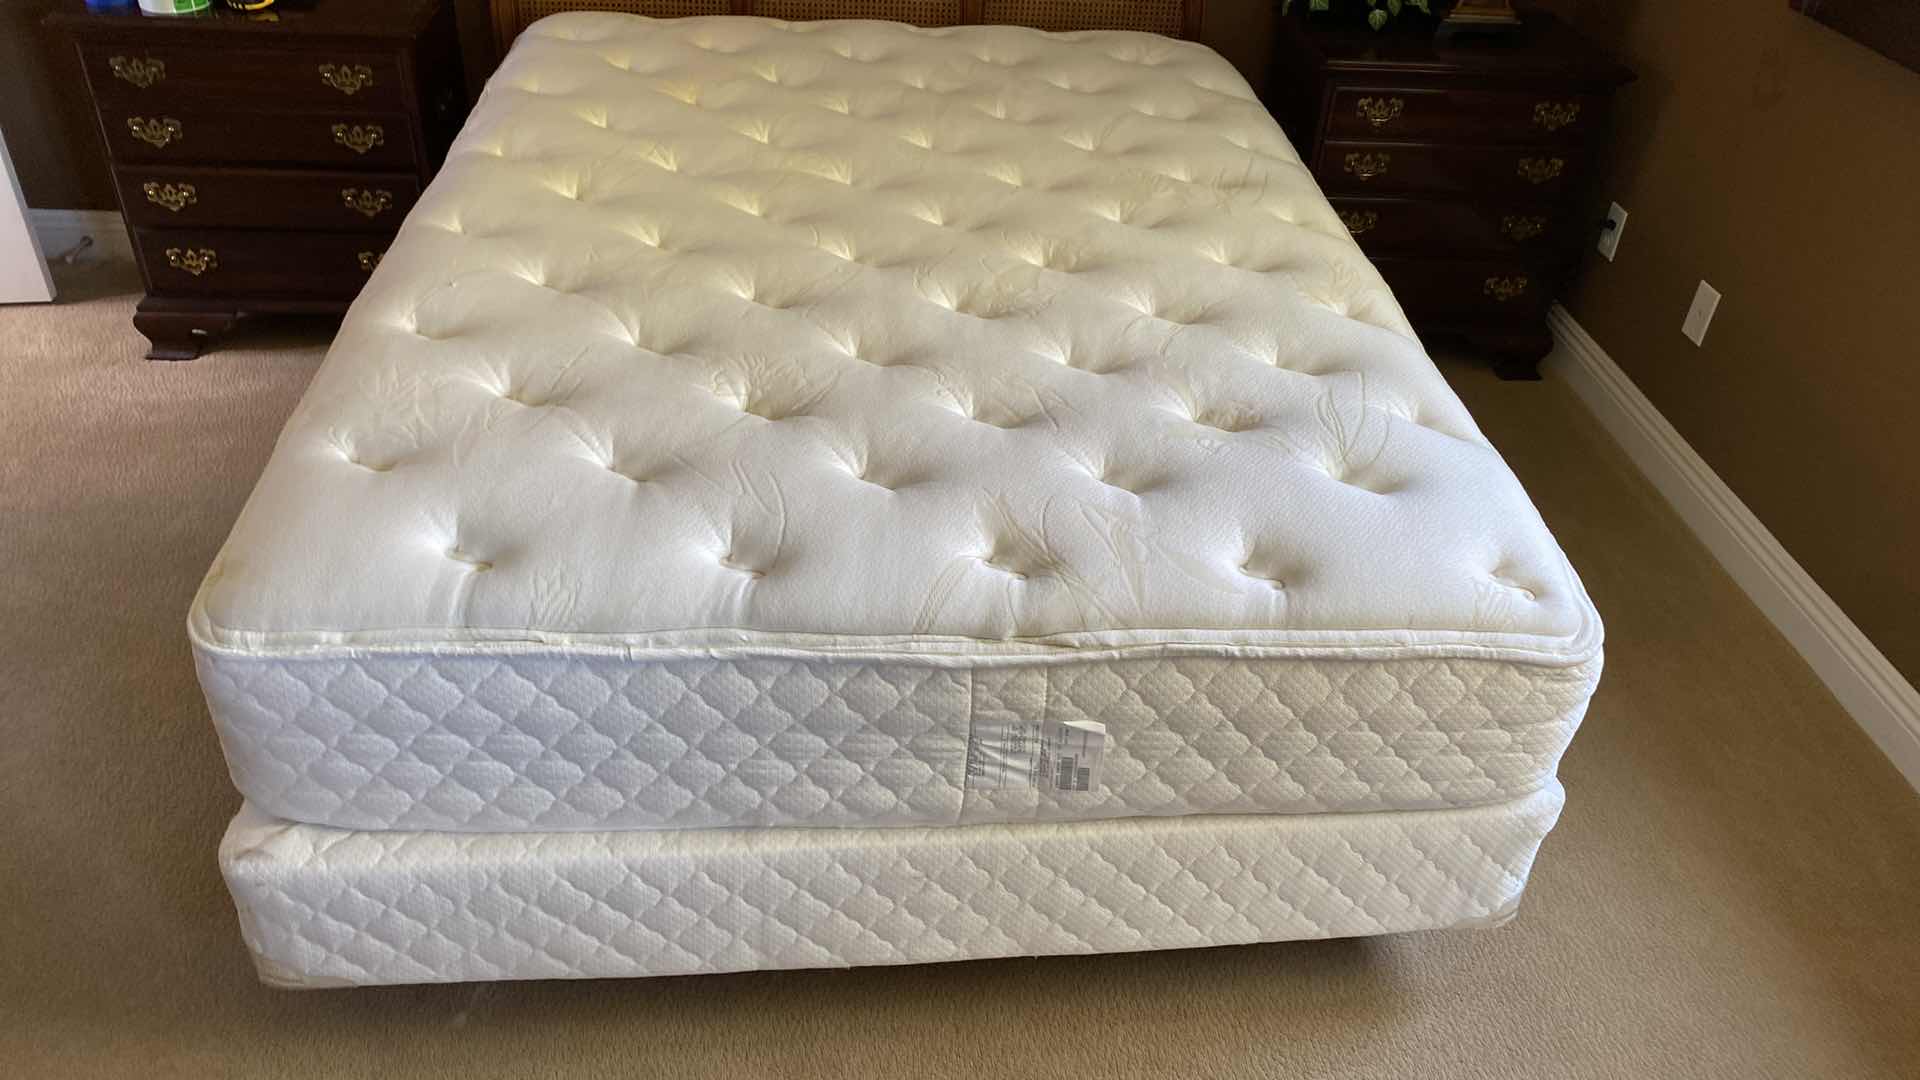 Photo 2 of KING KOIL QUEEN SIZE MATTRESS AND BOX SPRINGS AND BED FRAME 60” x 80” HEADBOARD SOLD SEPARATELY